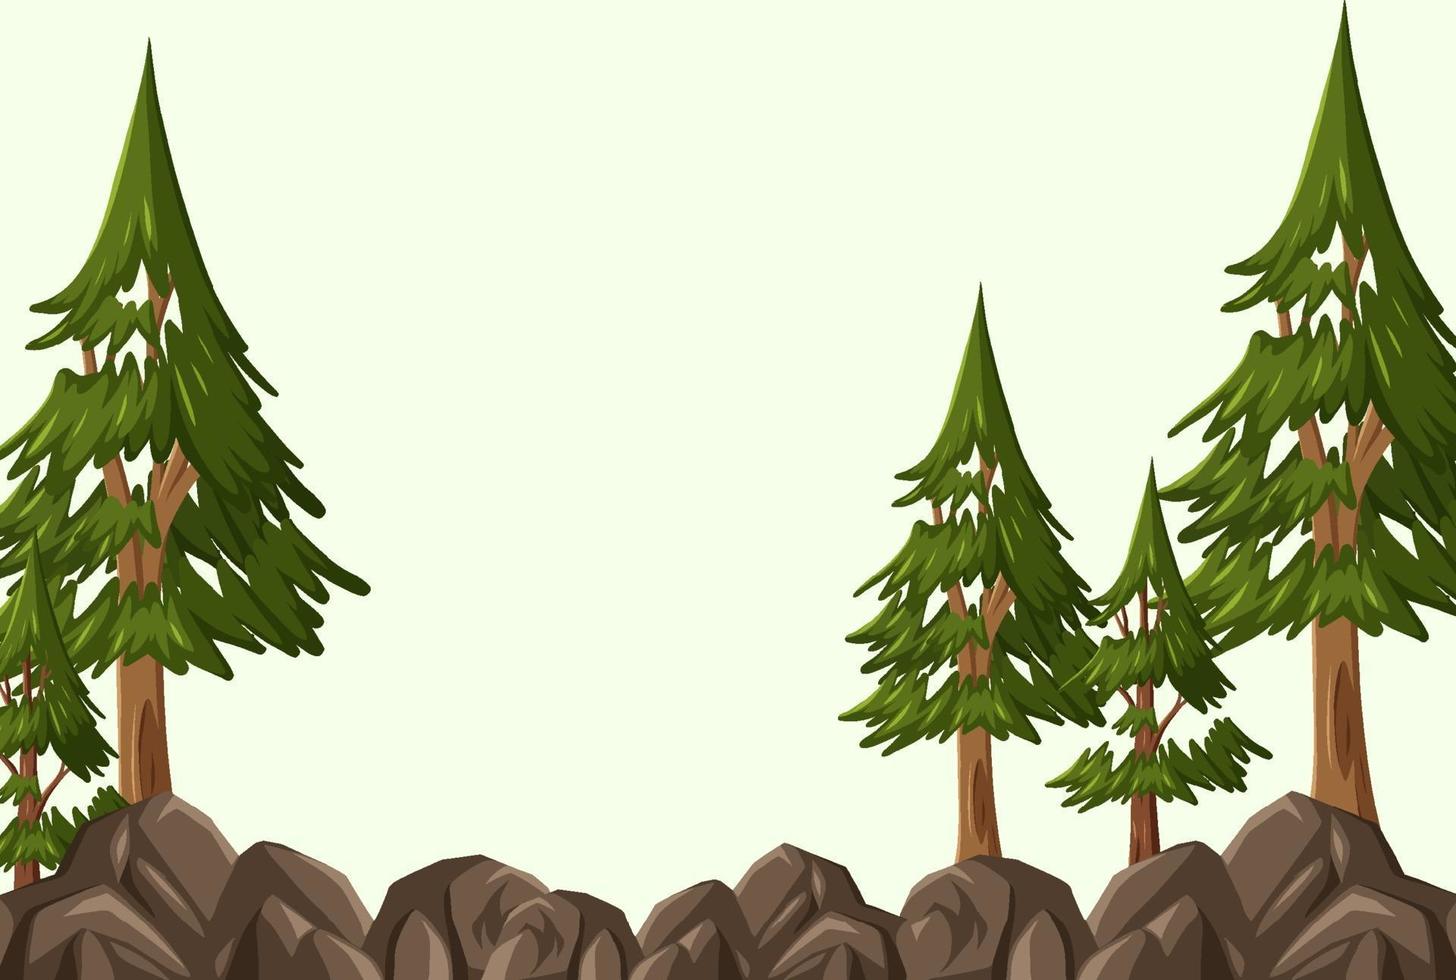 Empty background with many pine trees vector